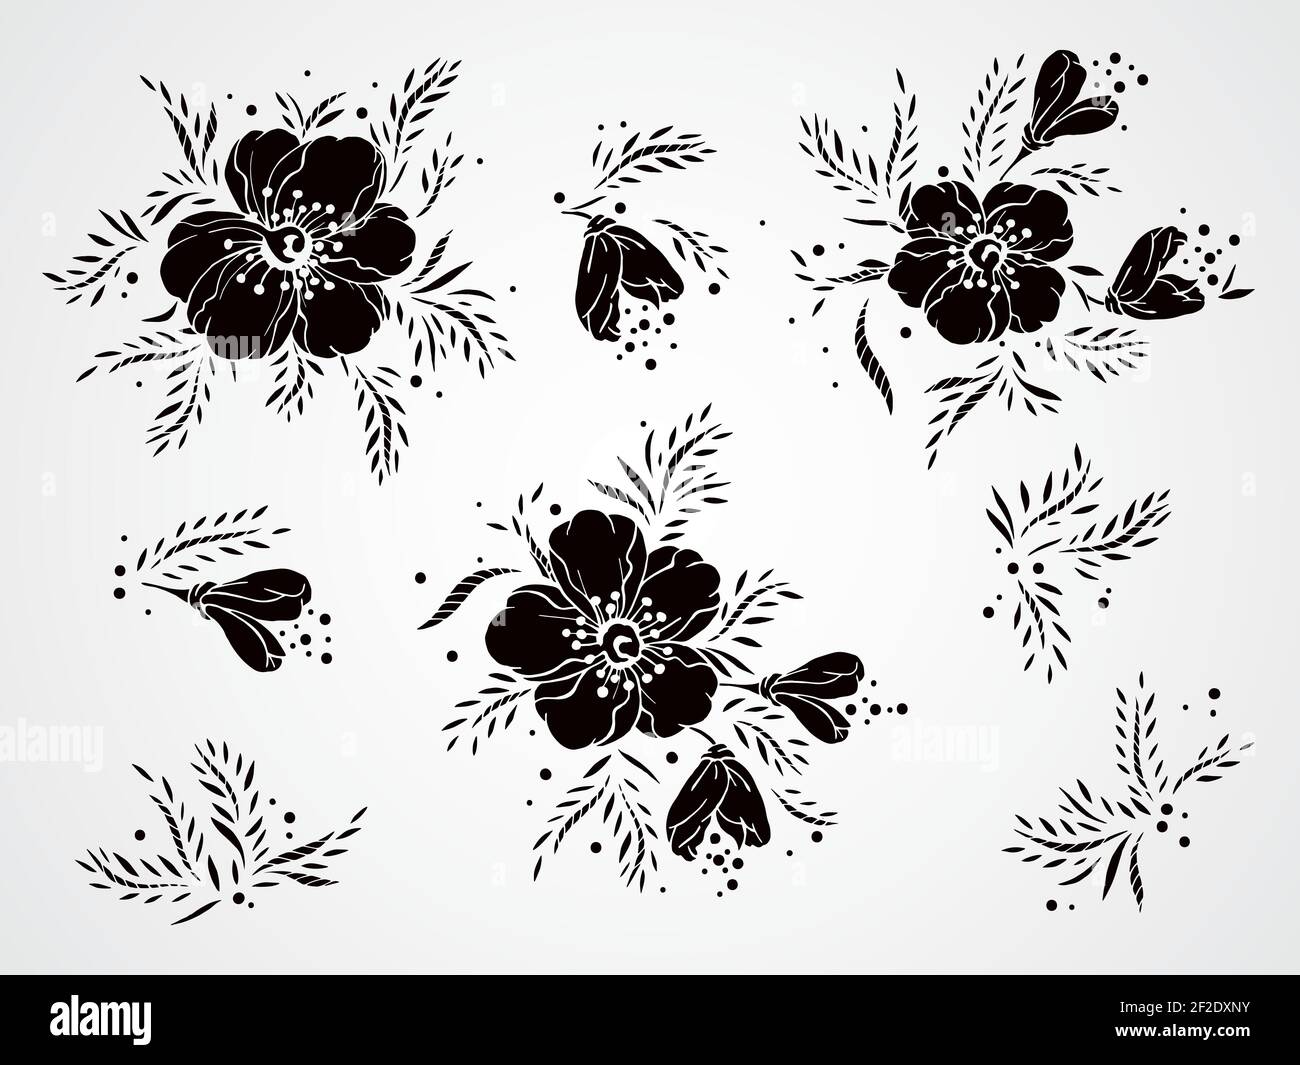 Vector set of black silhouettes hand drawn flowers, branches and leaves. Stock Vector